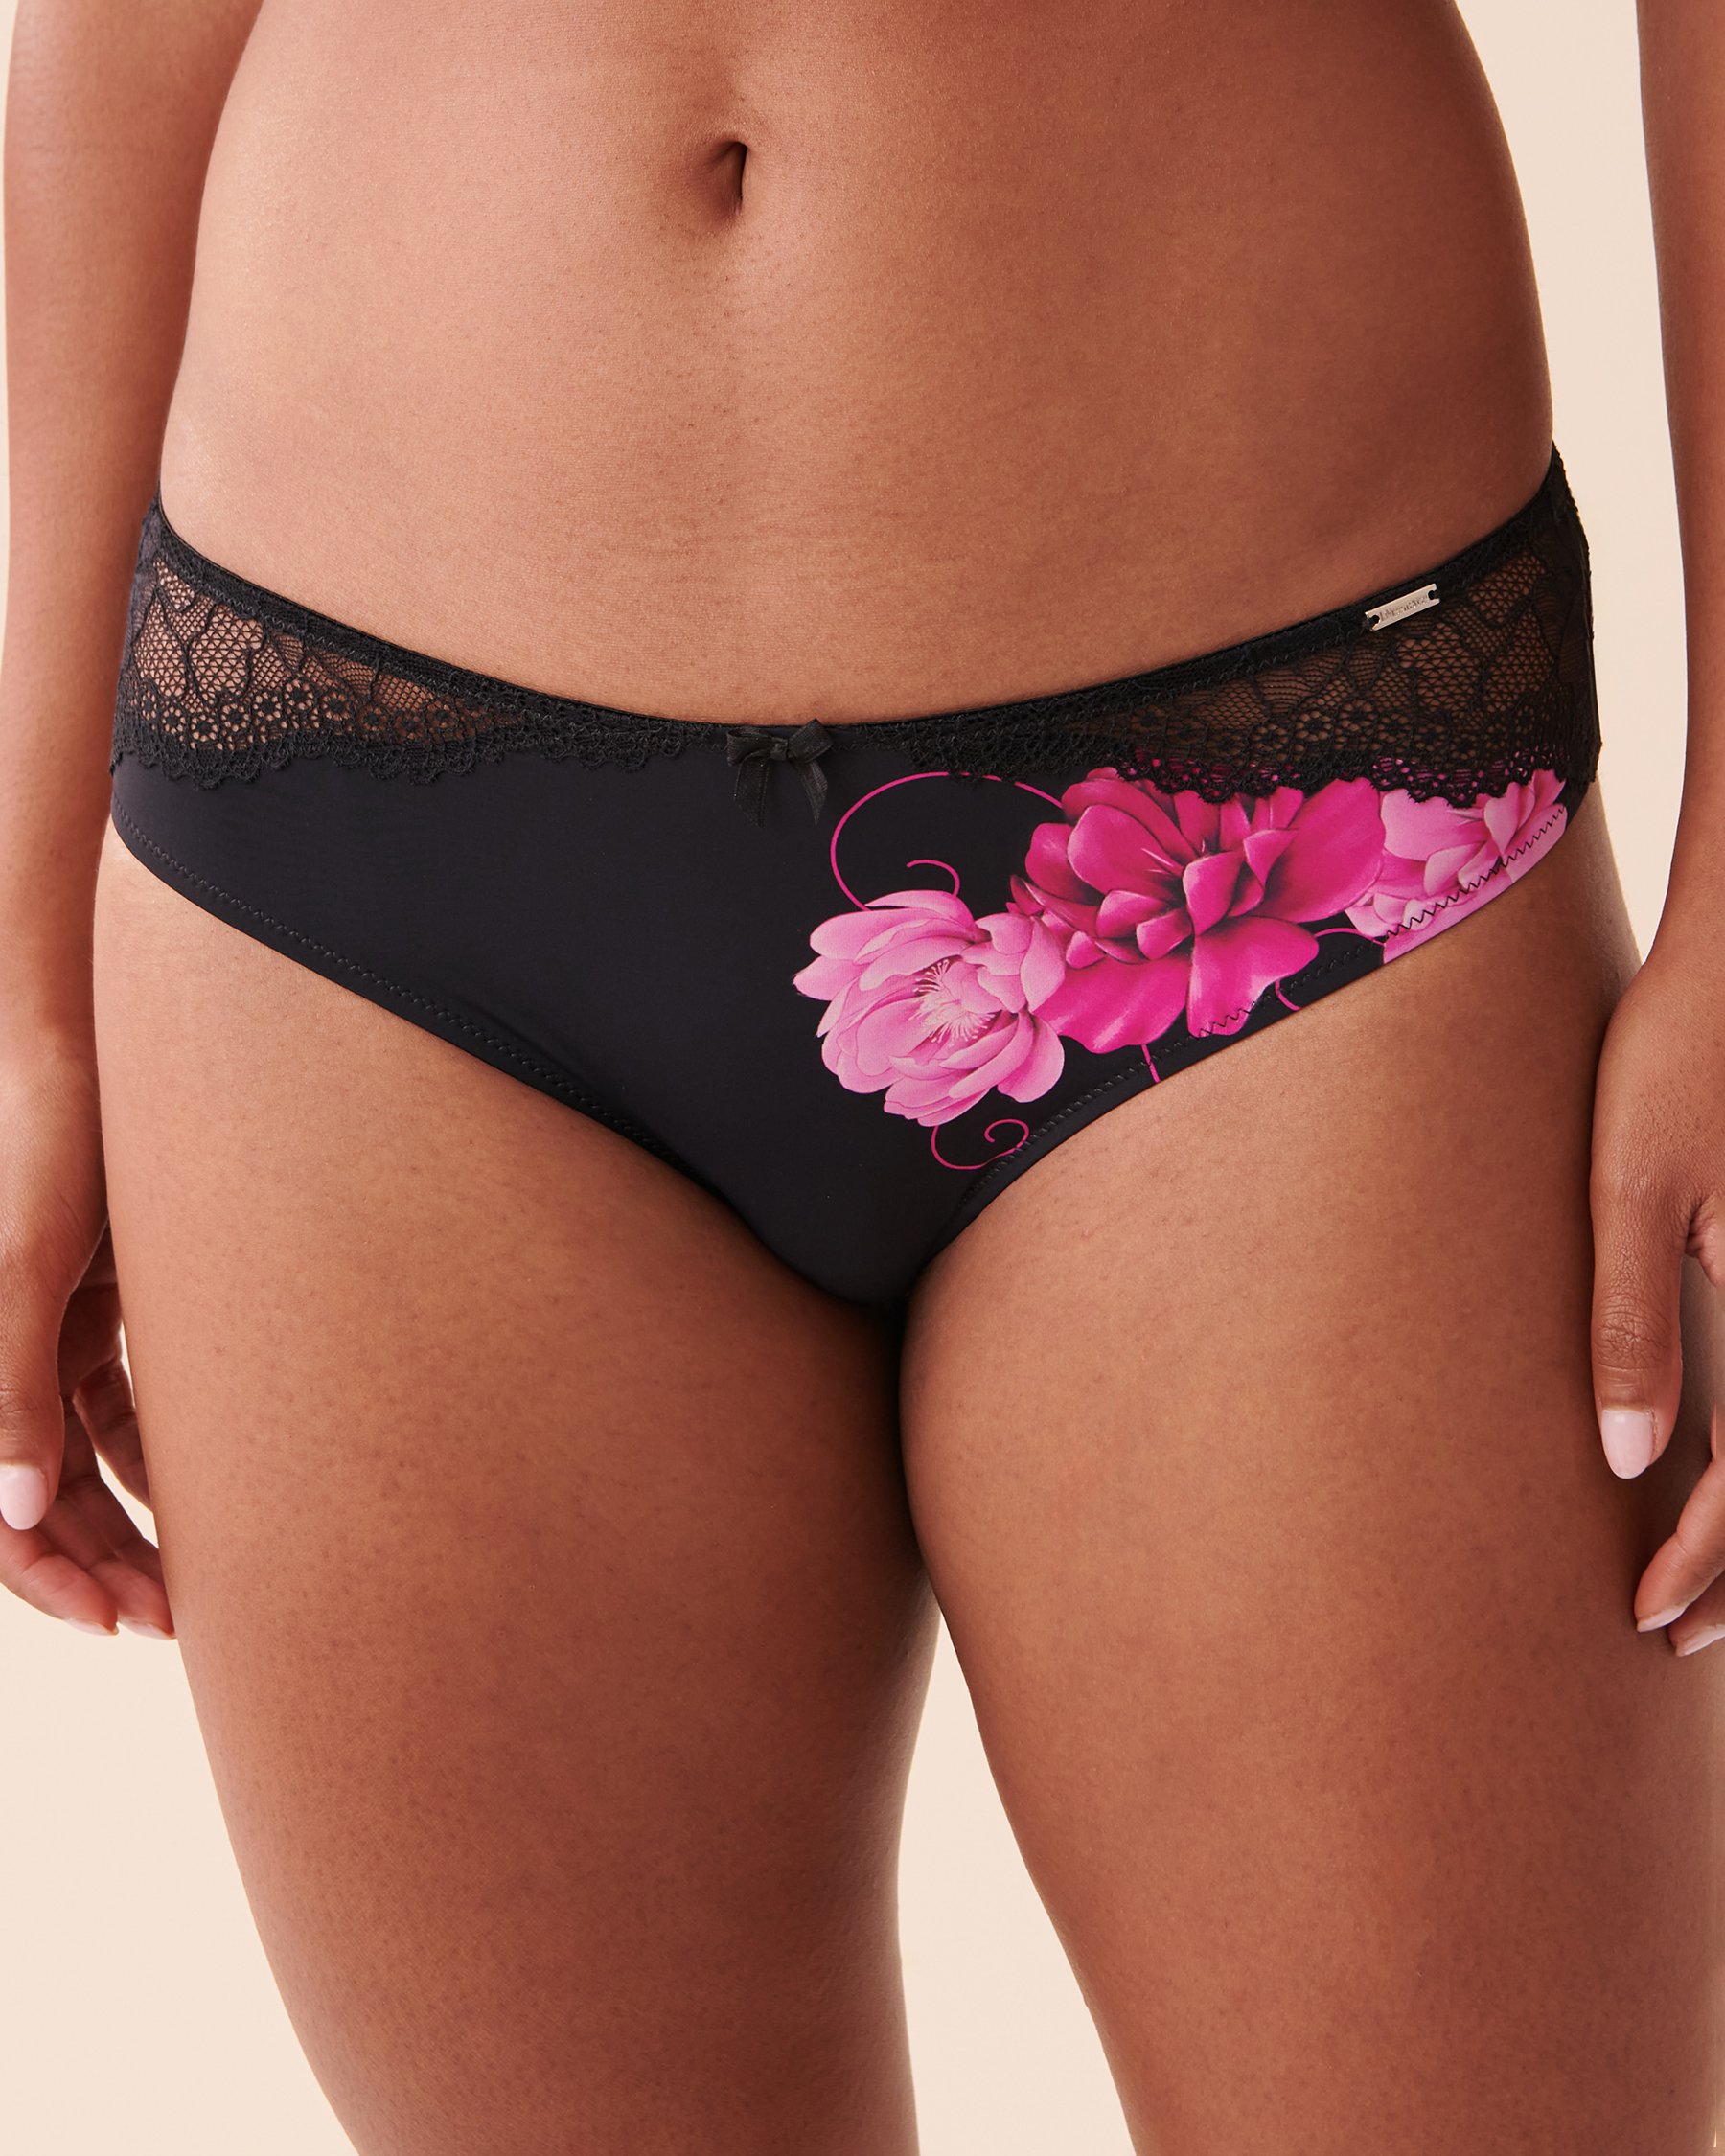 Best Deal for Womens Microfiber Underwear Flower Embroidery Lace